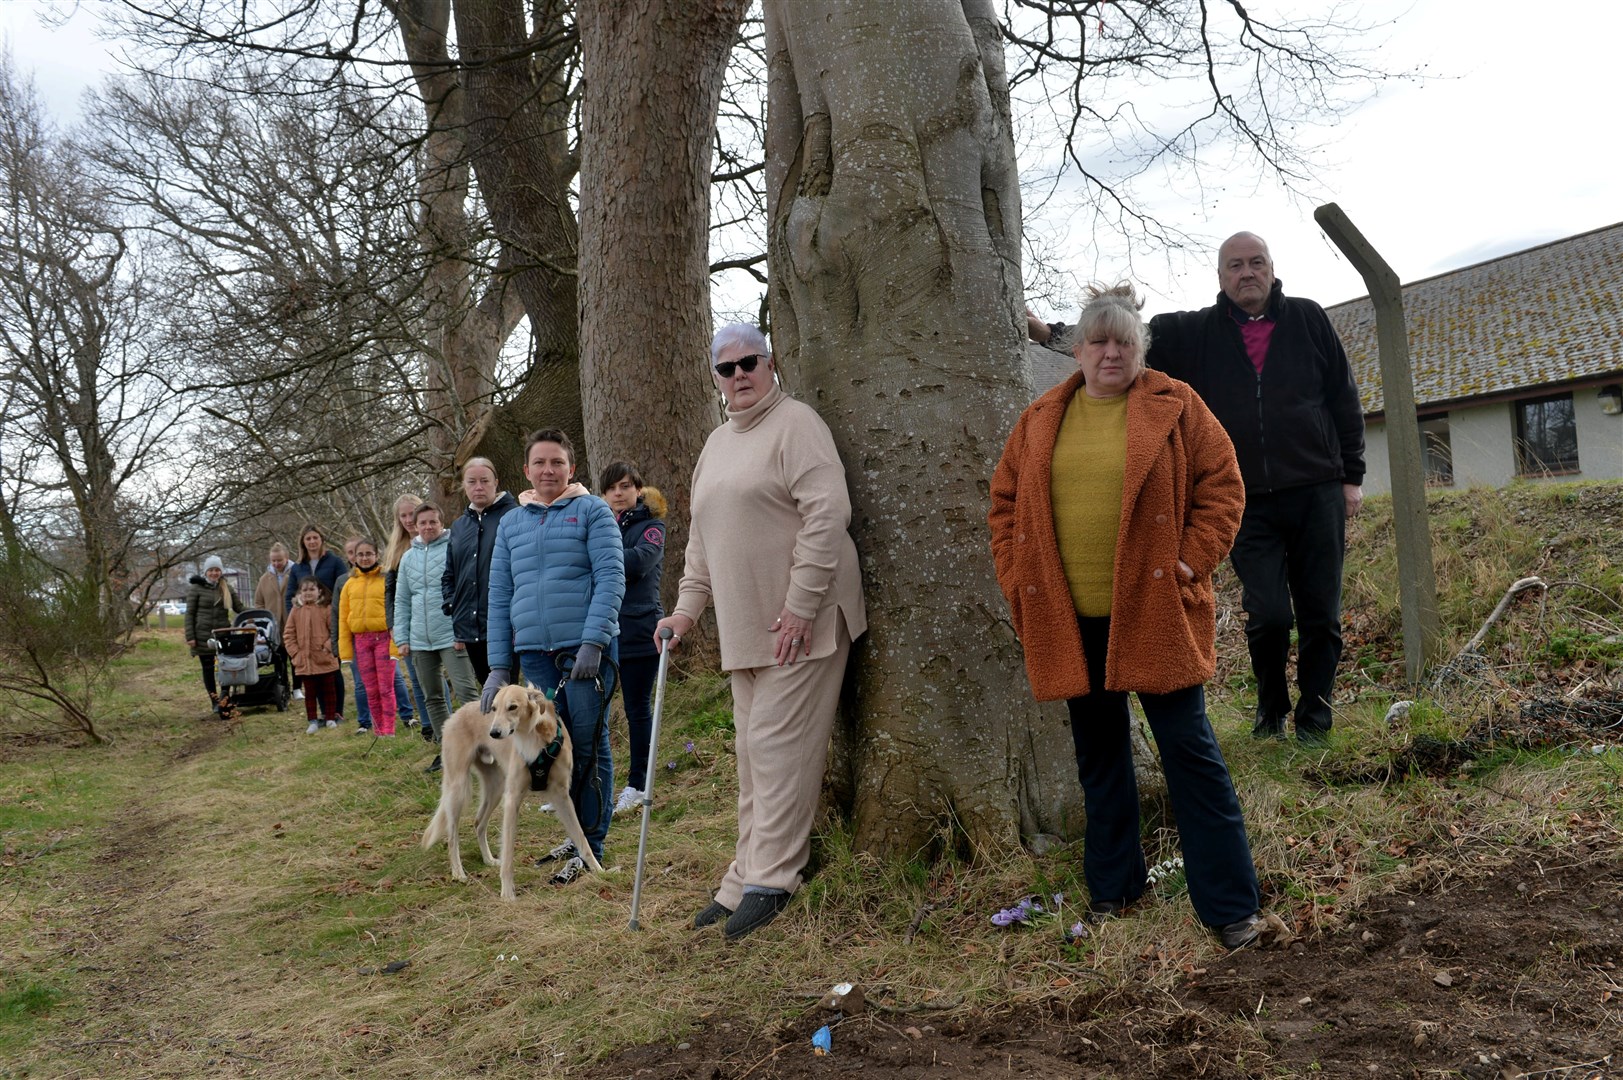 Residents are upset that trees between Raigmore estate and the hospital are to be cut down to create a bus link.